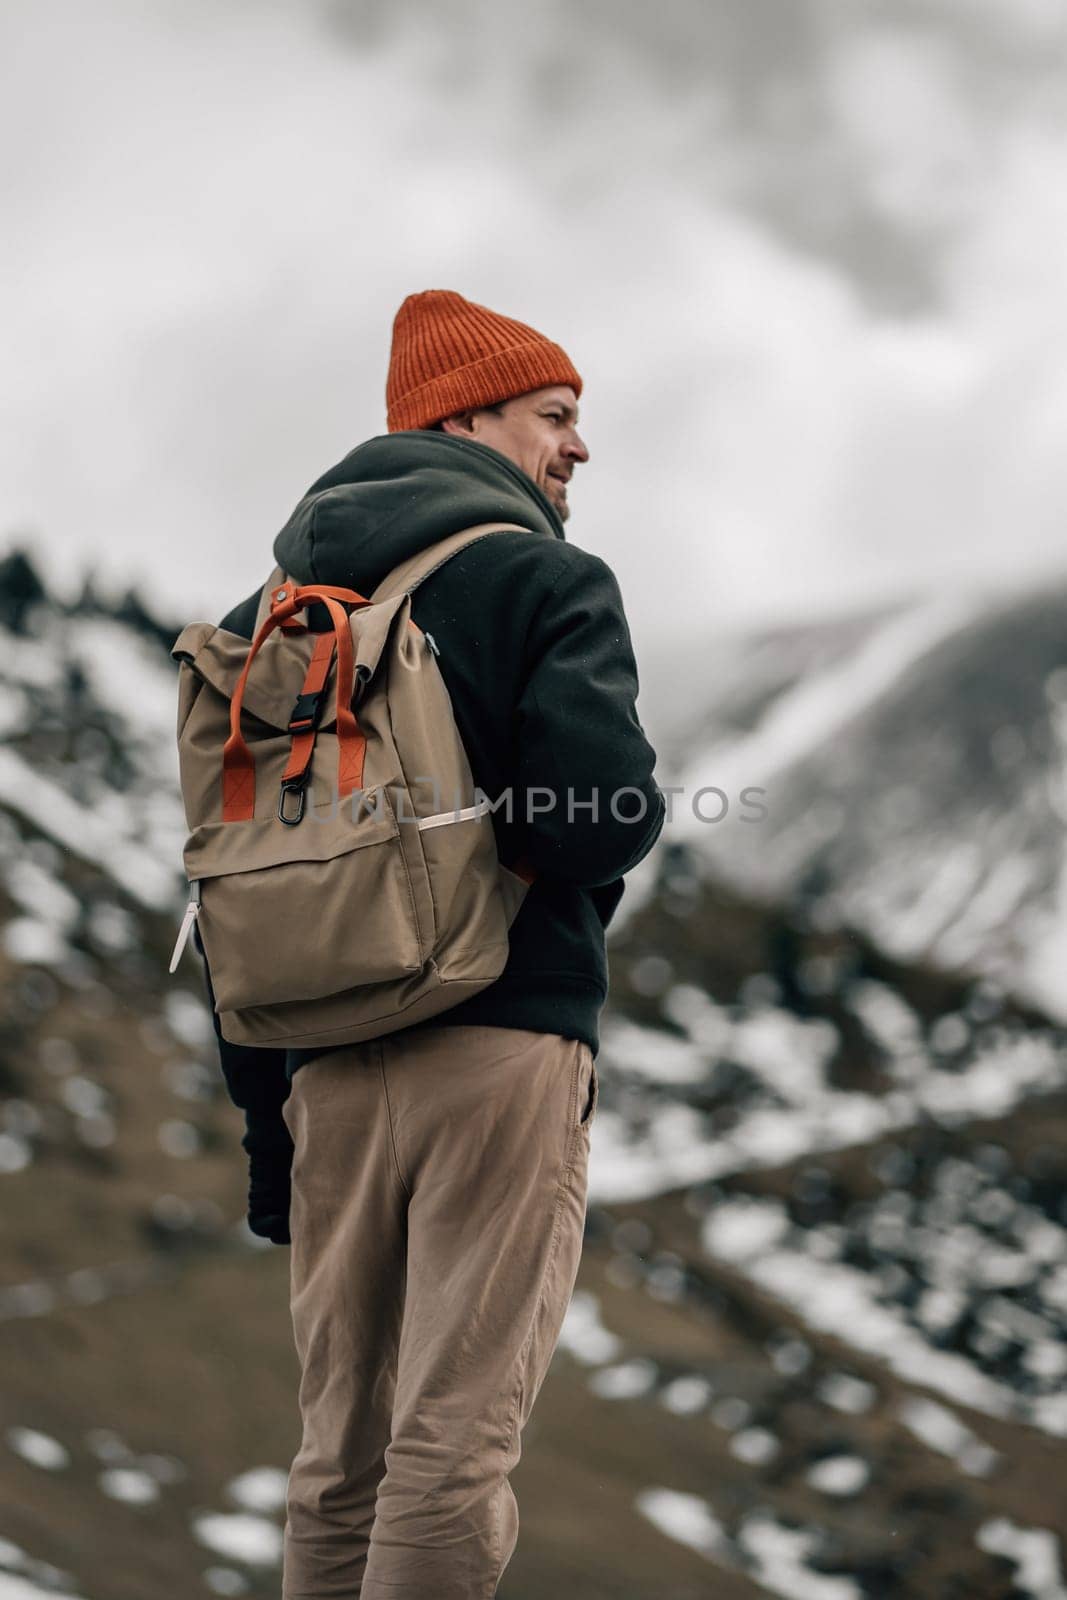 With a rugged terrain before him, a hiker stands ready to embrace the wild, snow-laden landscape.